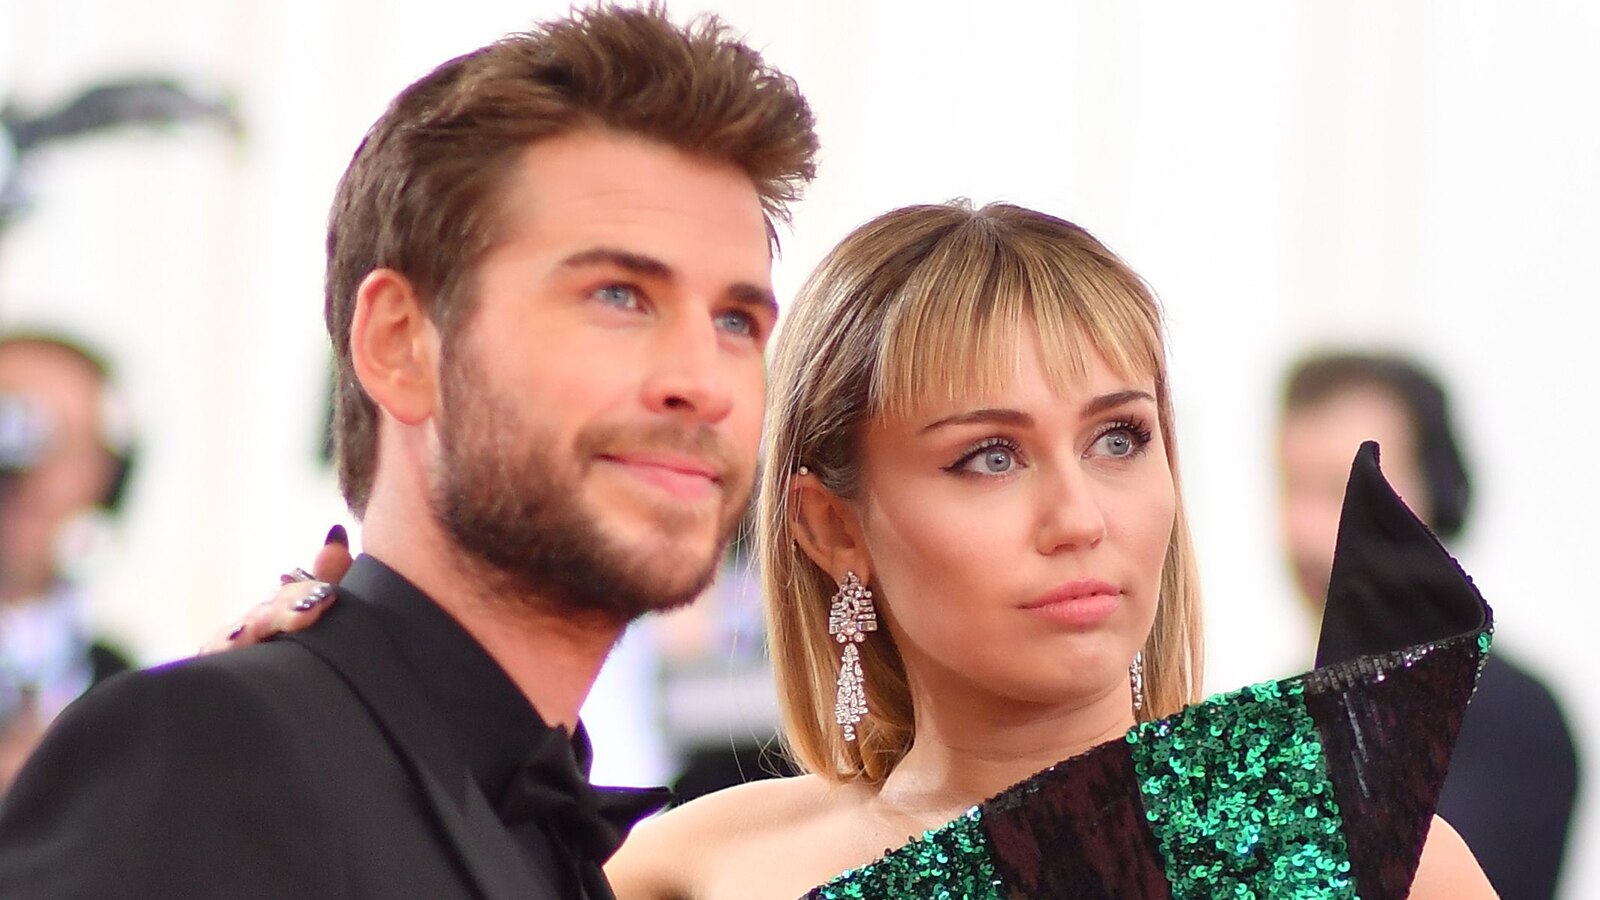 Watch Access Hollywood Interview Miley Cyrus And Liam Hemsworth Split After Less Than 8 Months